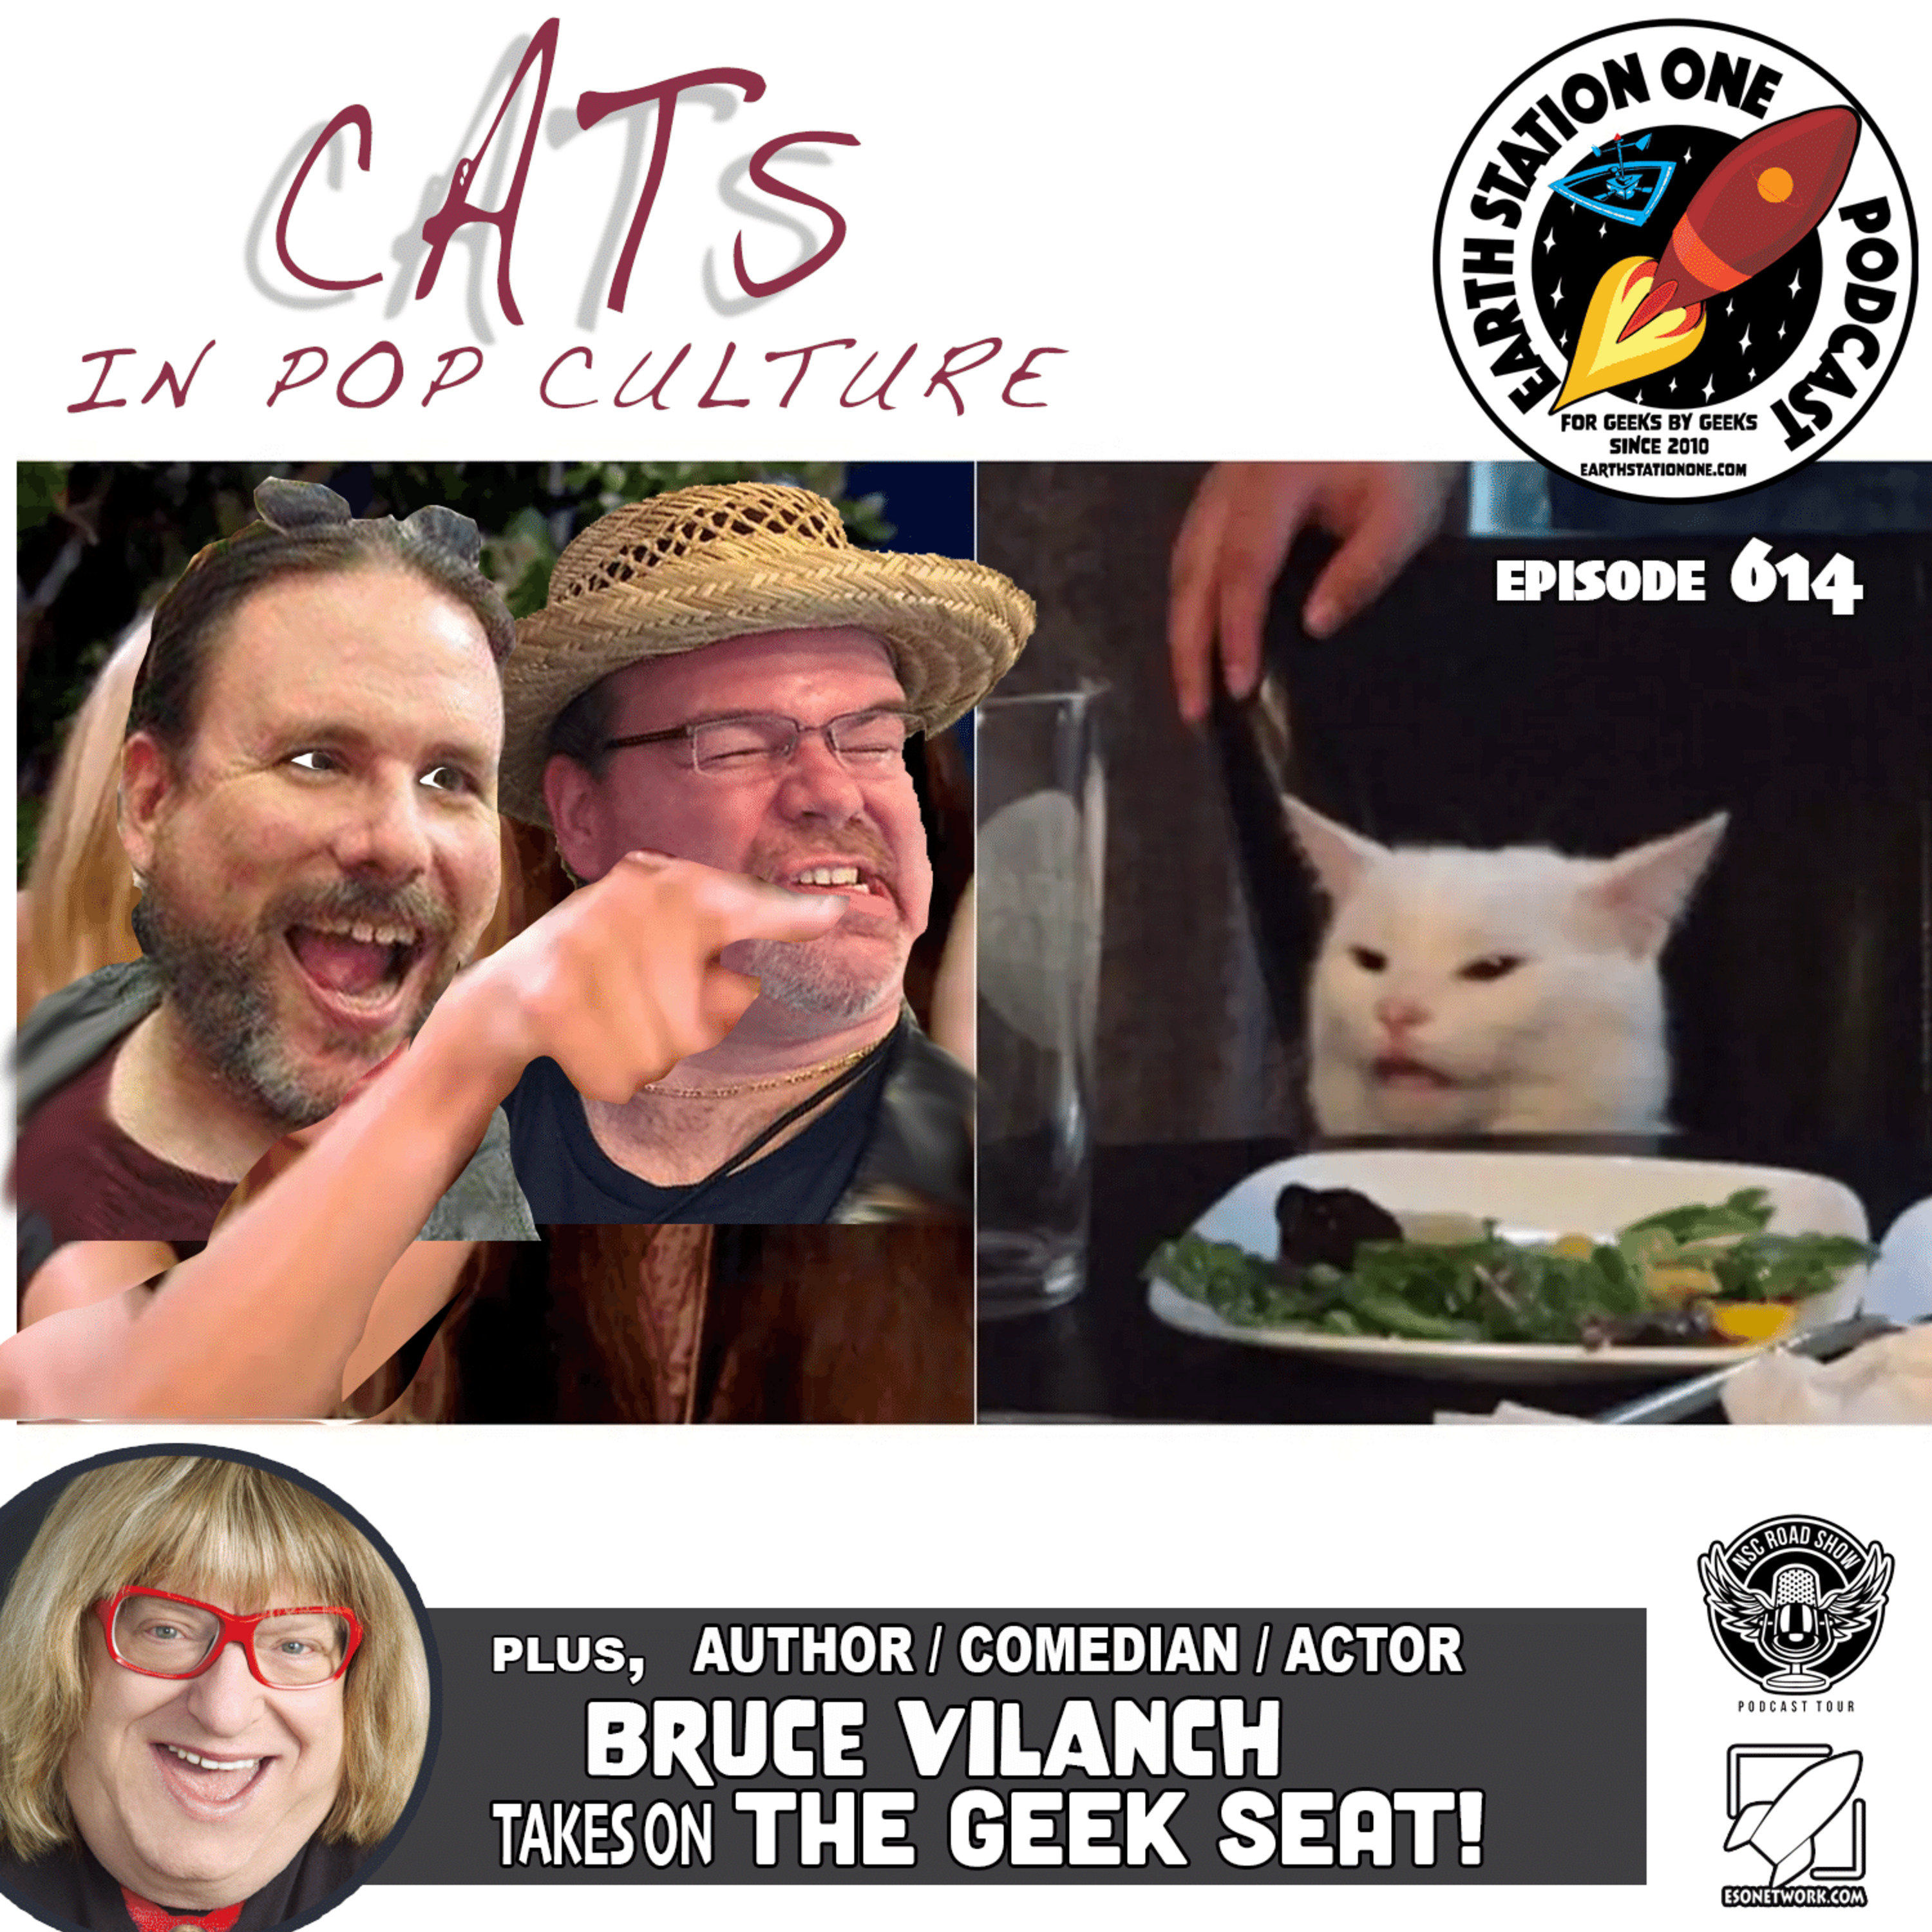 The Earth Station One Podcast  - Cats In Pop Culture